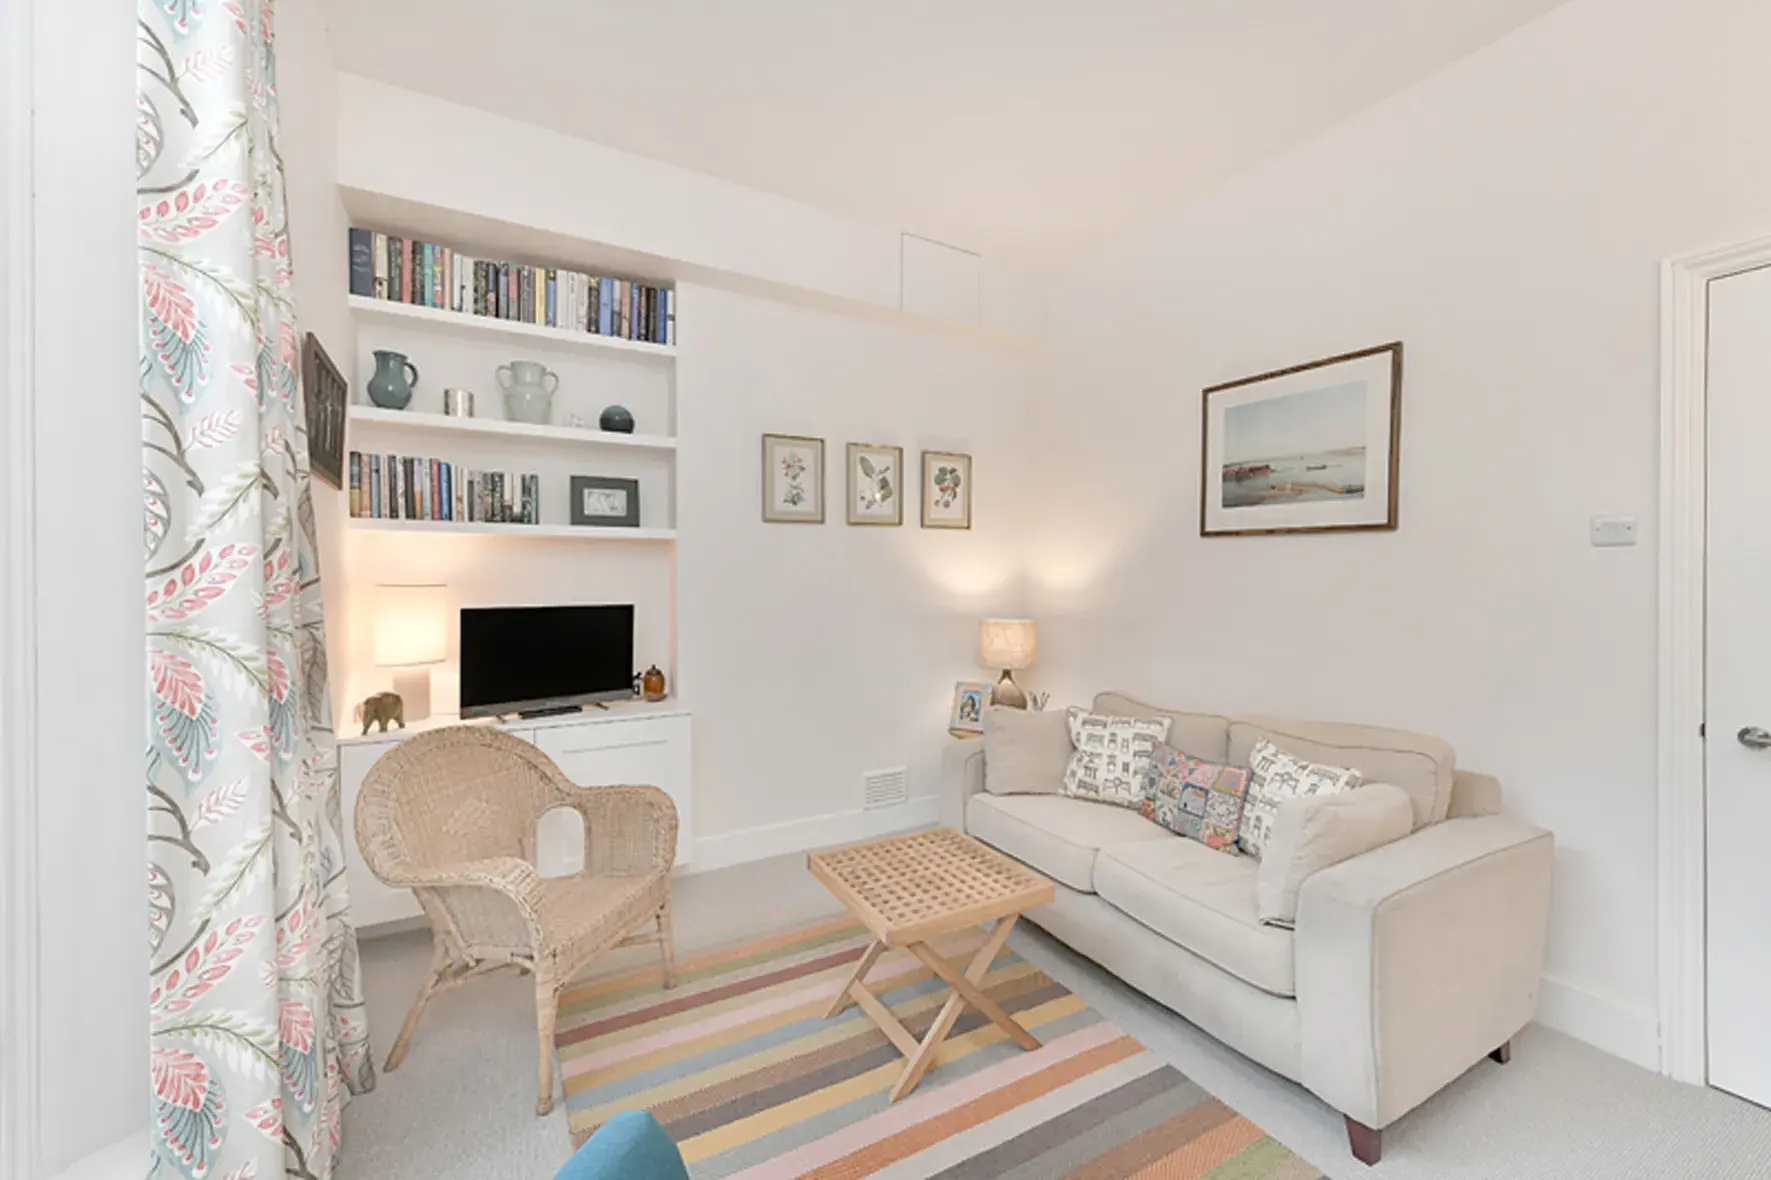 Collingham Road, holiday home in Kensington, London